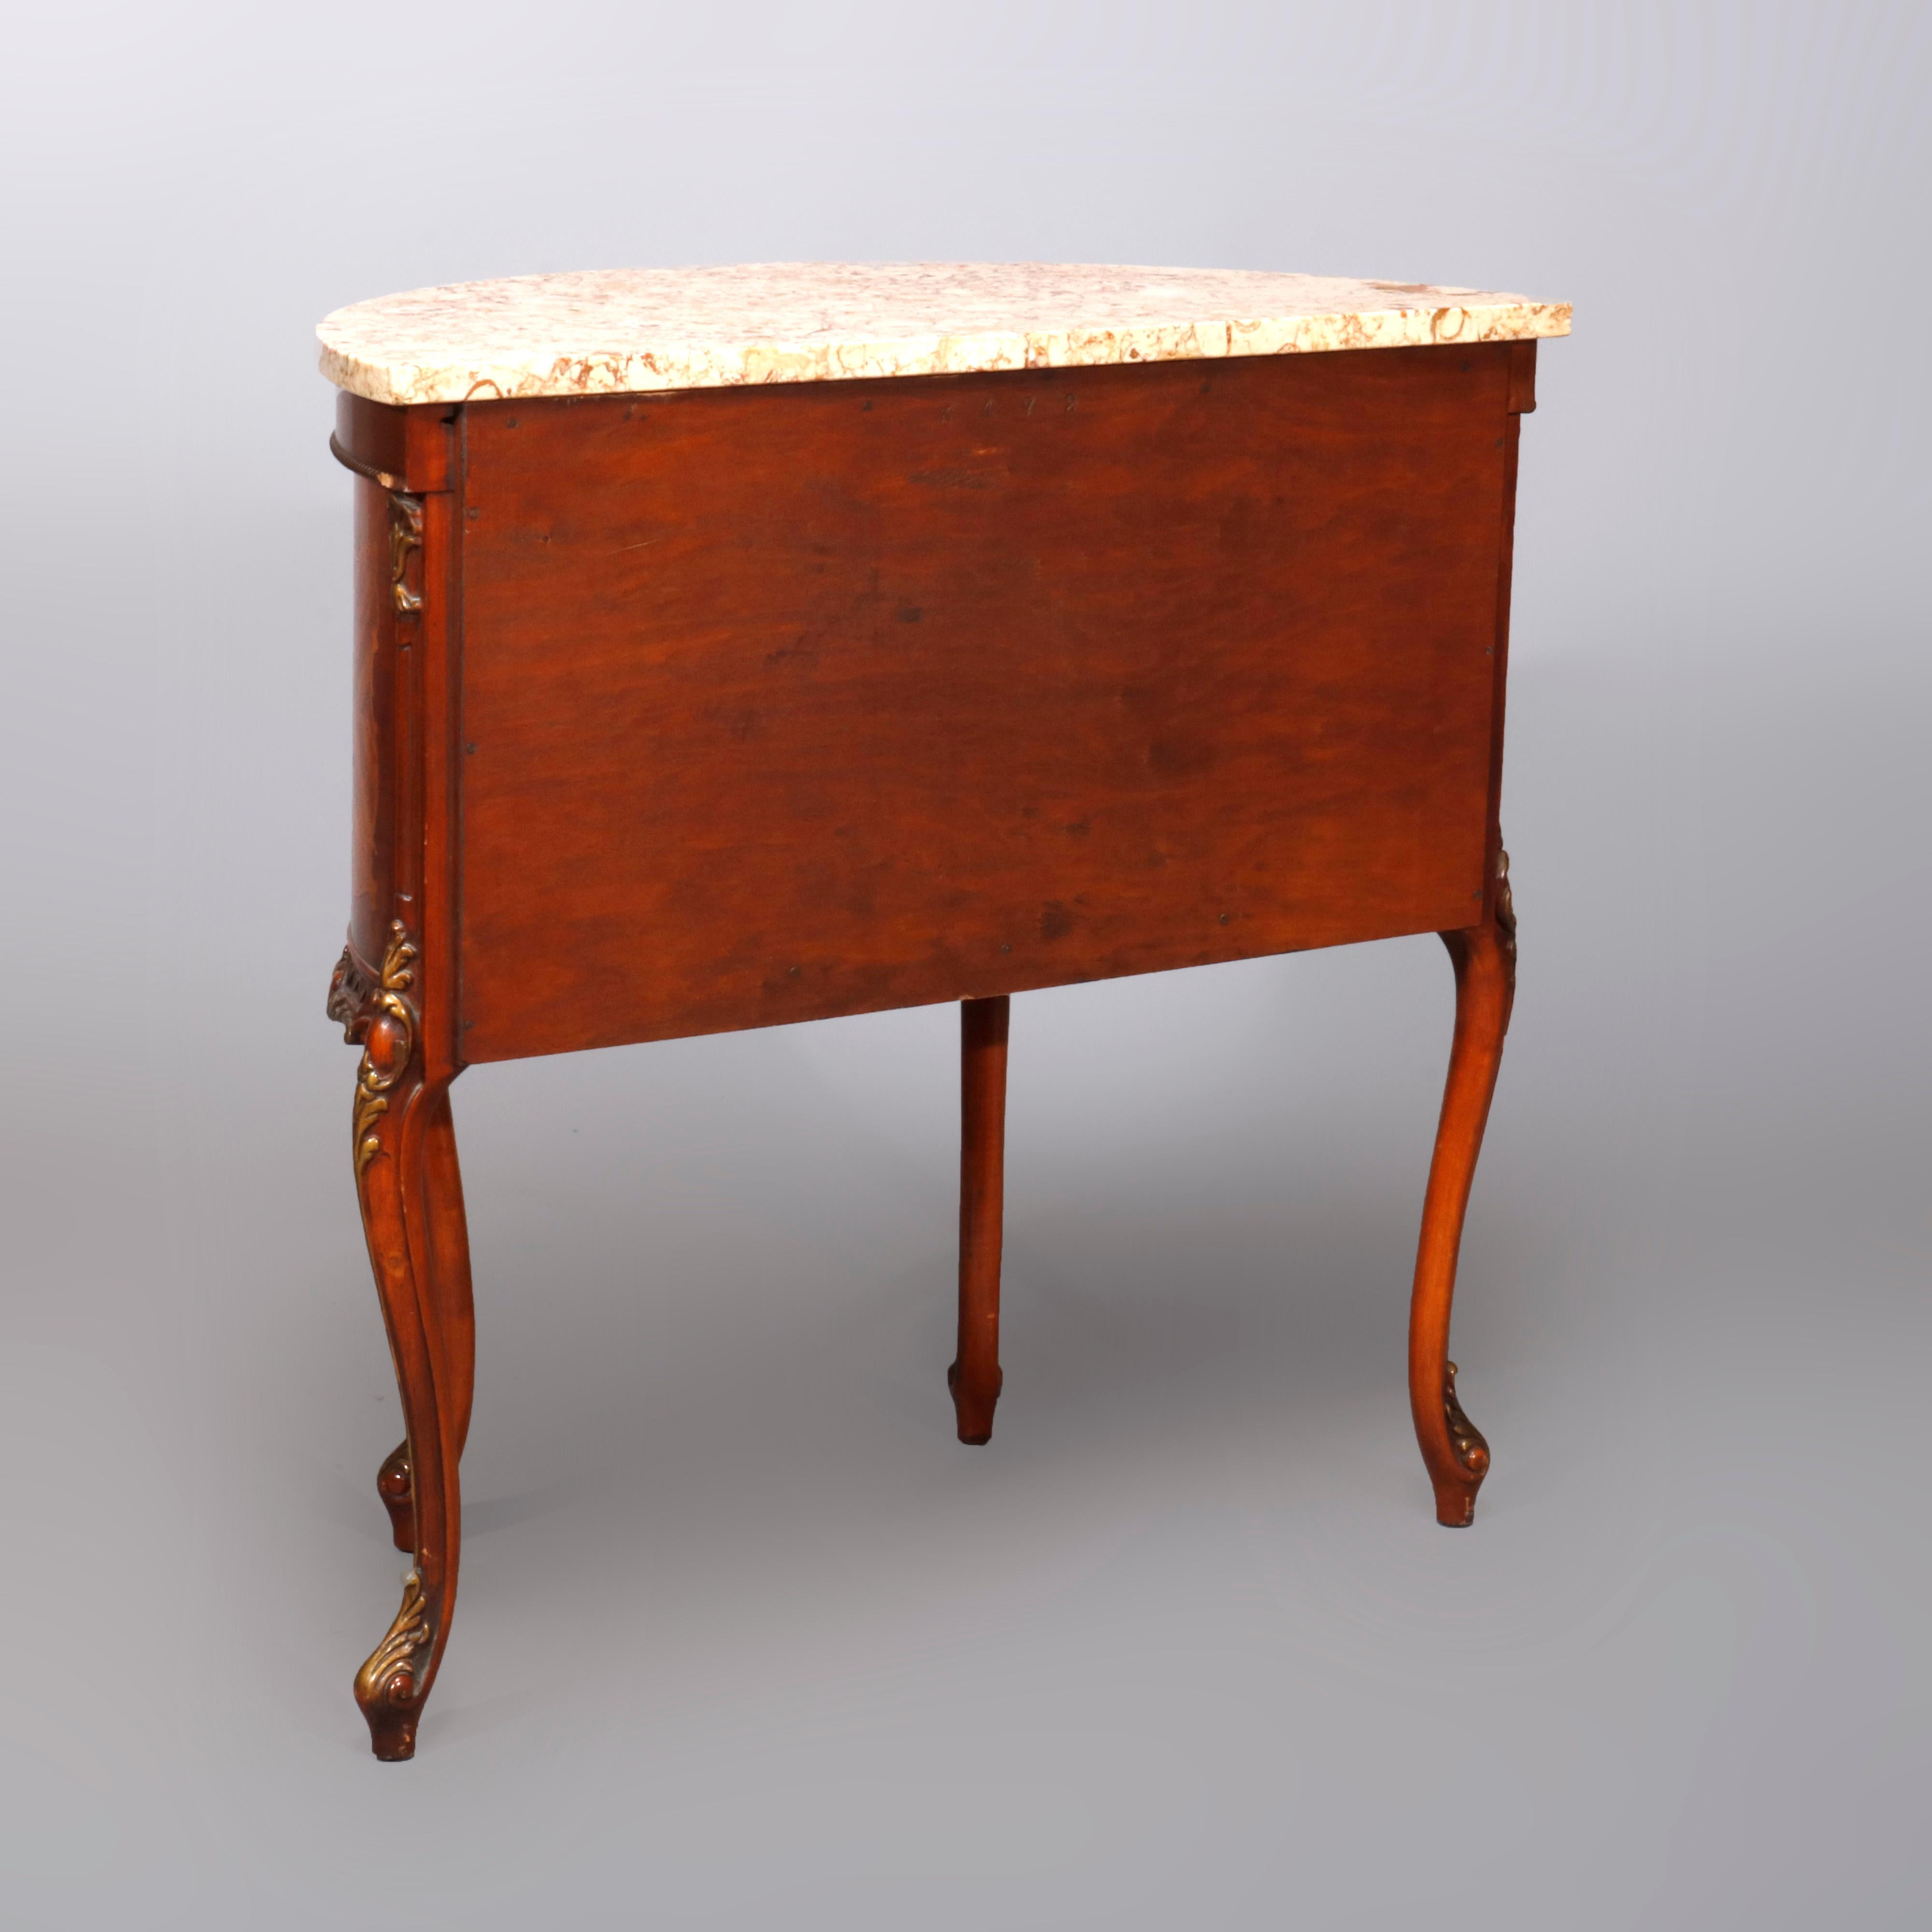 20th Century Antique French Louis XV Satinwood Inlaid Mahogany Marble Top Commode